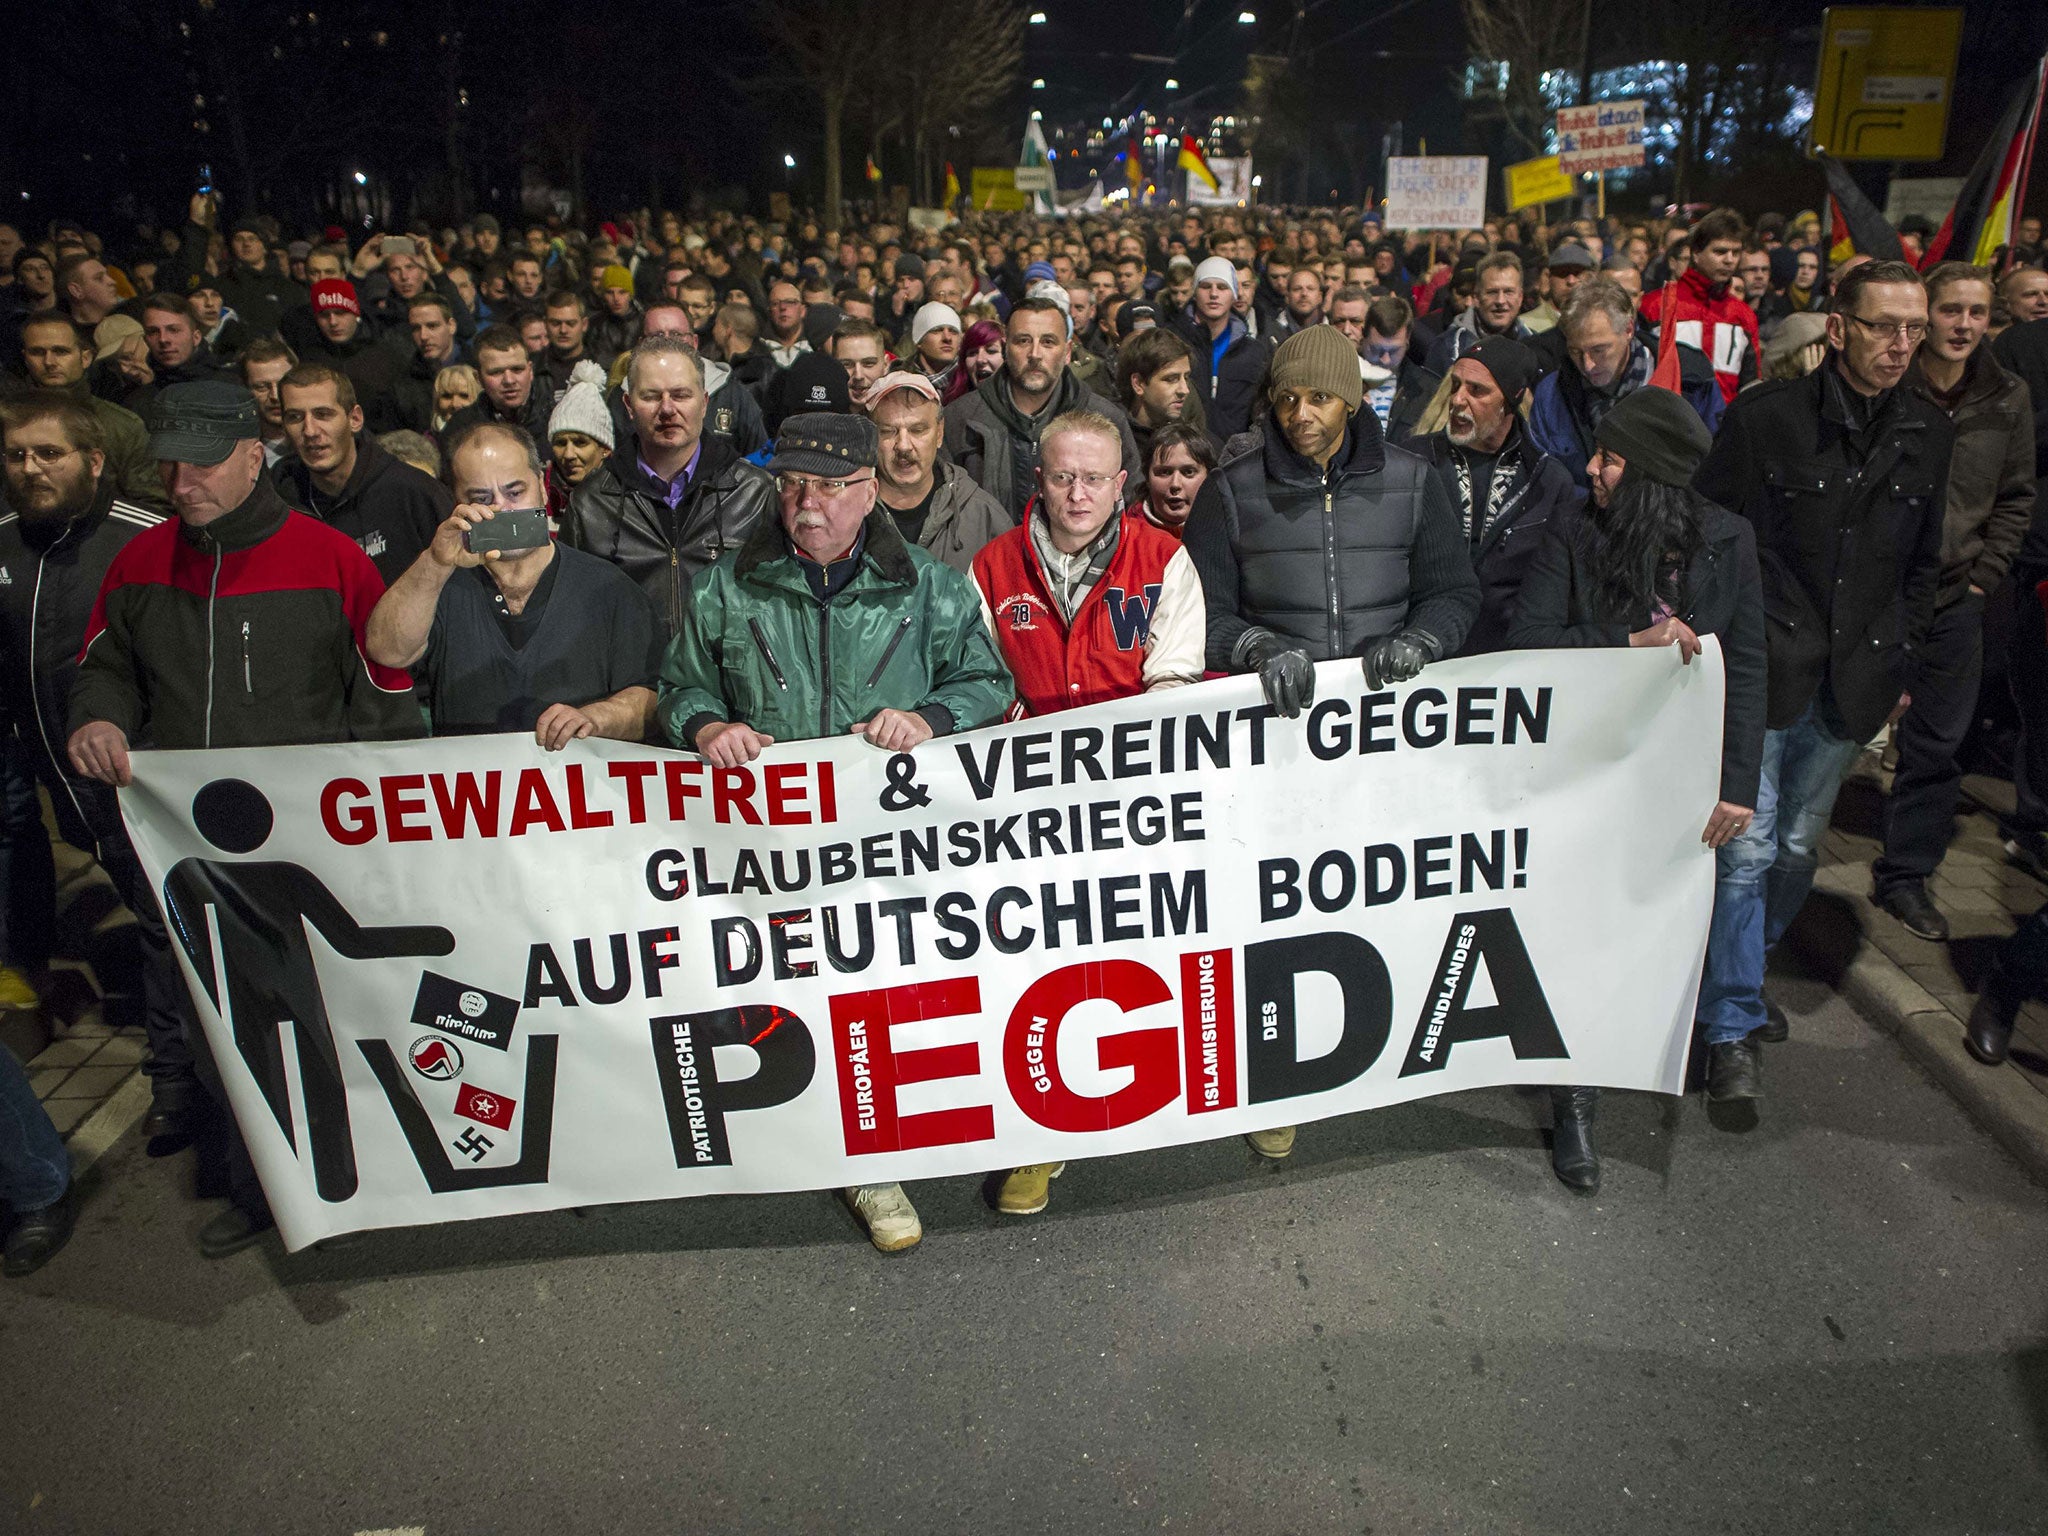 Supporters of the PEGIDA movement, 'Patriotische Europaeer gegen die Islamisierung des Abendlandes,' which translates to 'Patriotic Europeans Against the Islamification of the Occident'